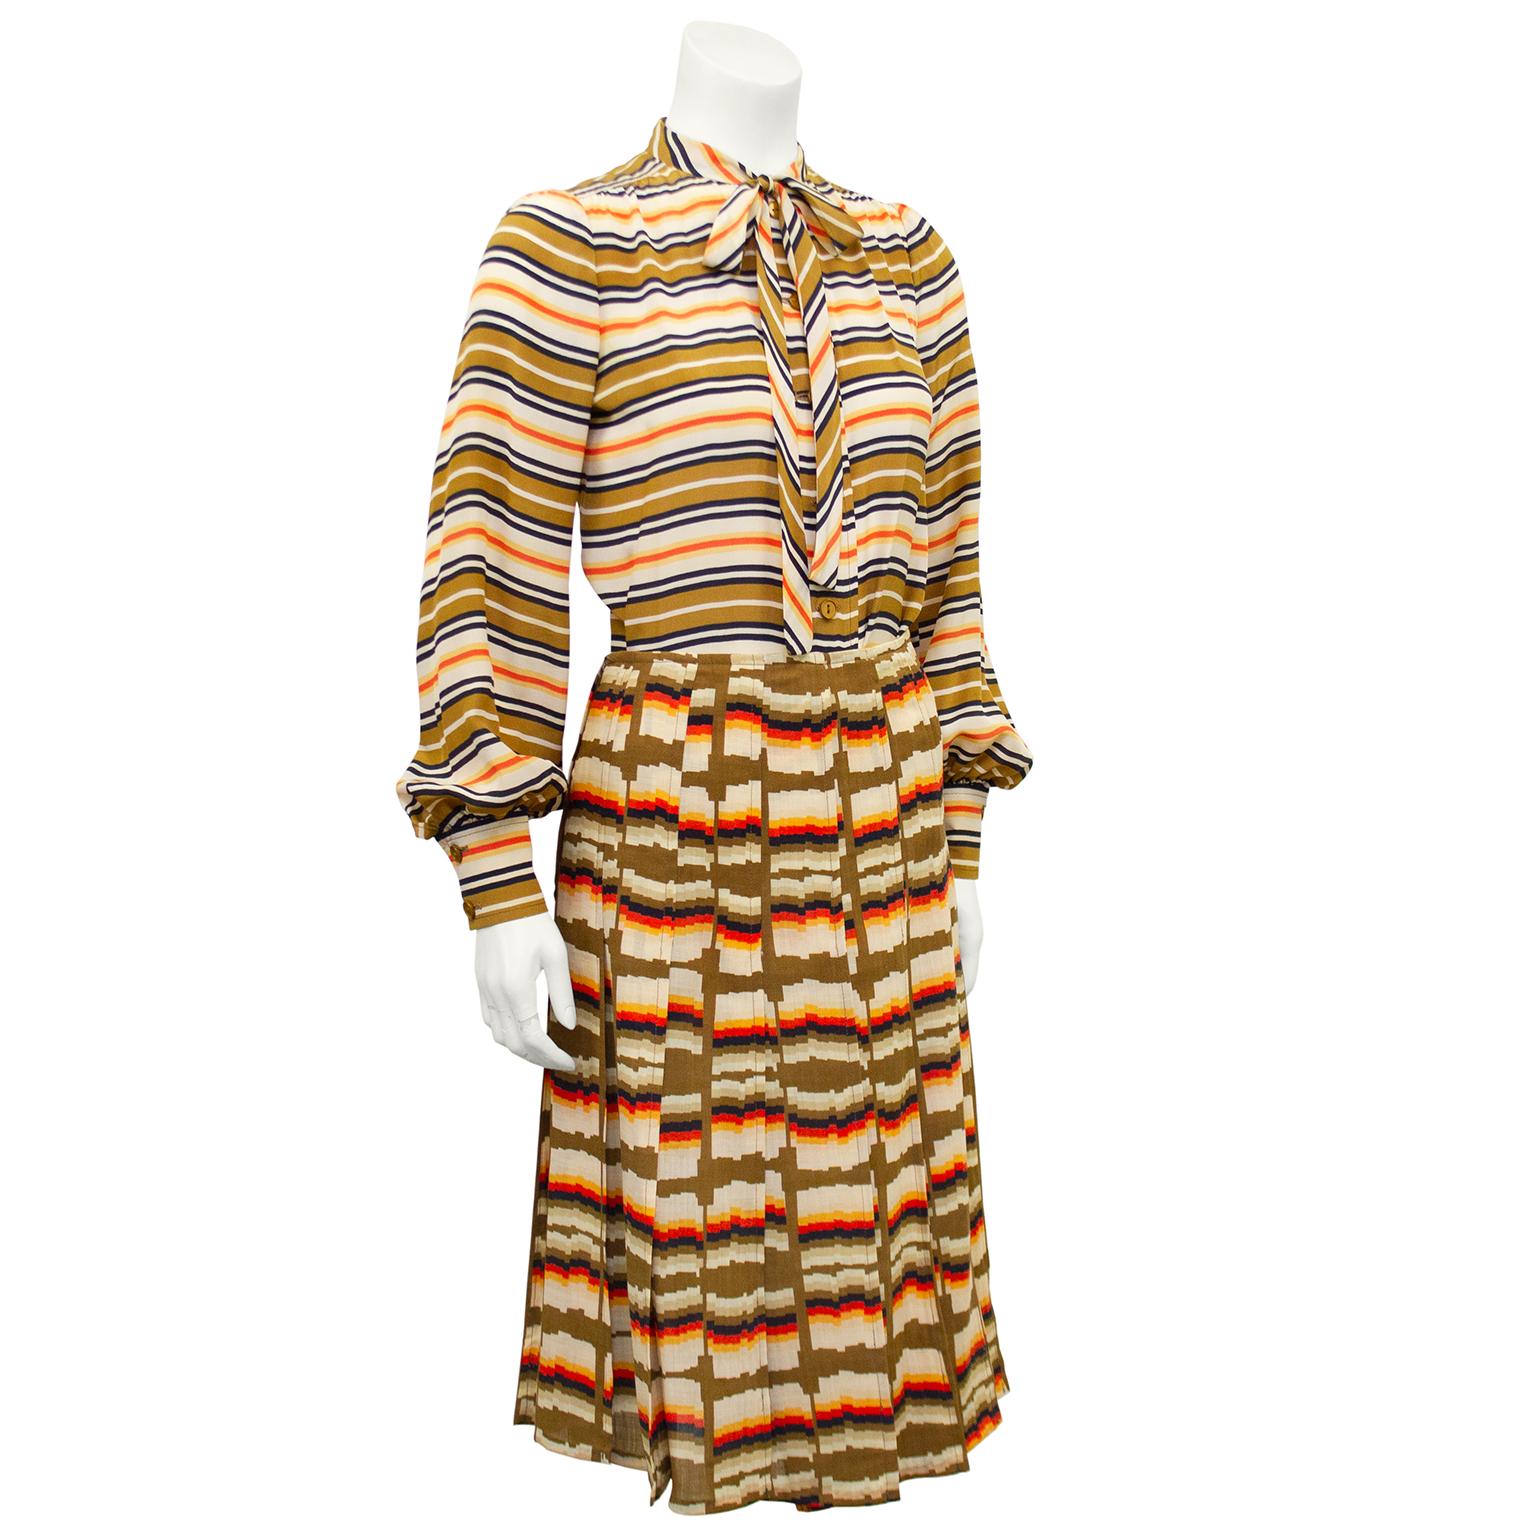 1970s Emanuel Ungaro blouse and skirt ensemble. Blouse features horizontal stripes in beige, brown, black and orange, bishop sleeves and a thin pussy bow tie . The skirt features the same colour story with a distorted horizontal stripe. Skirt is